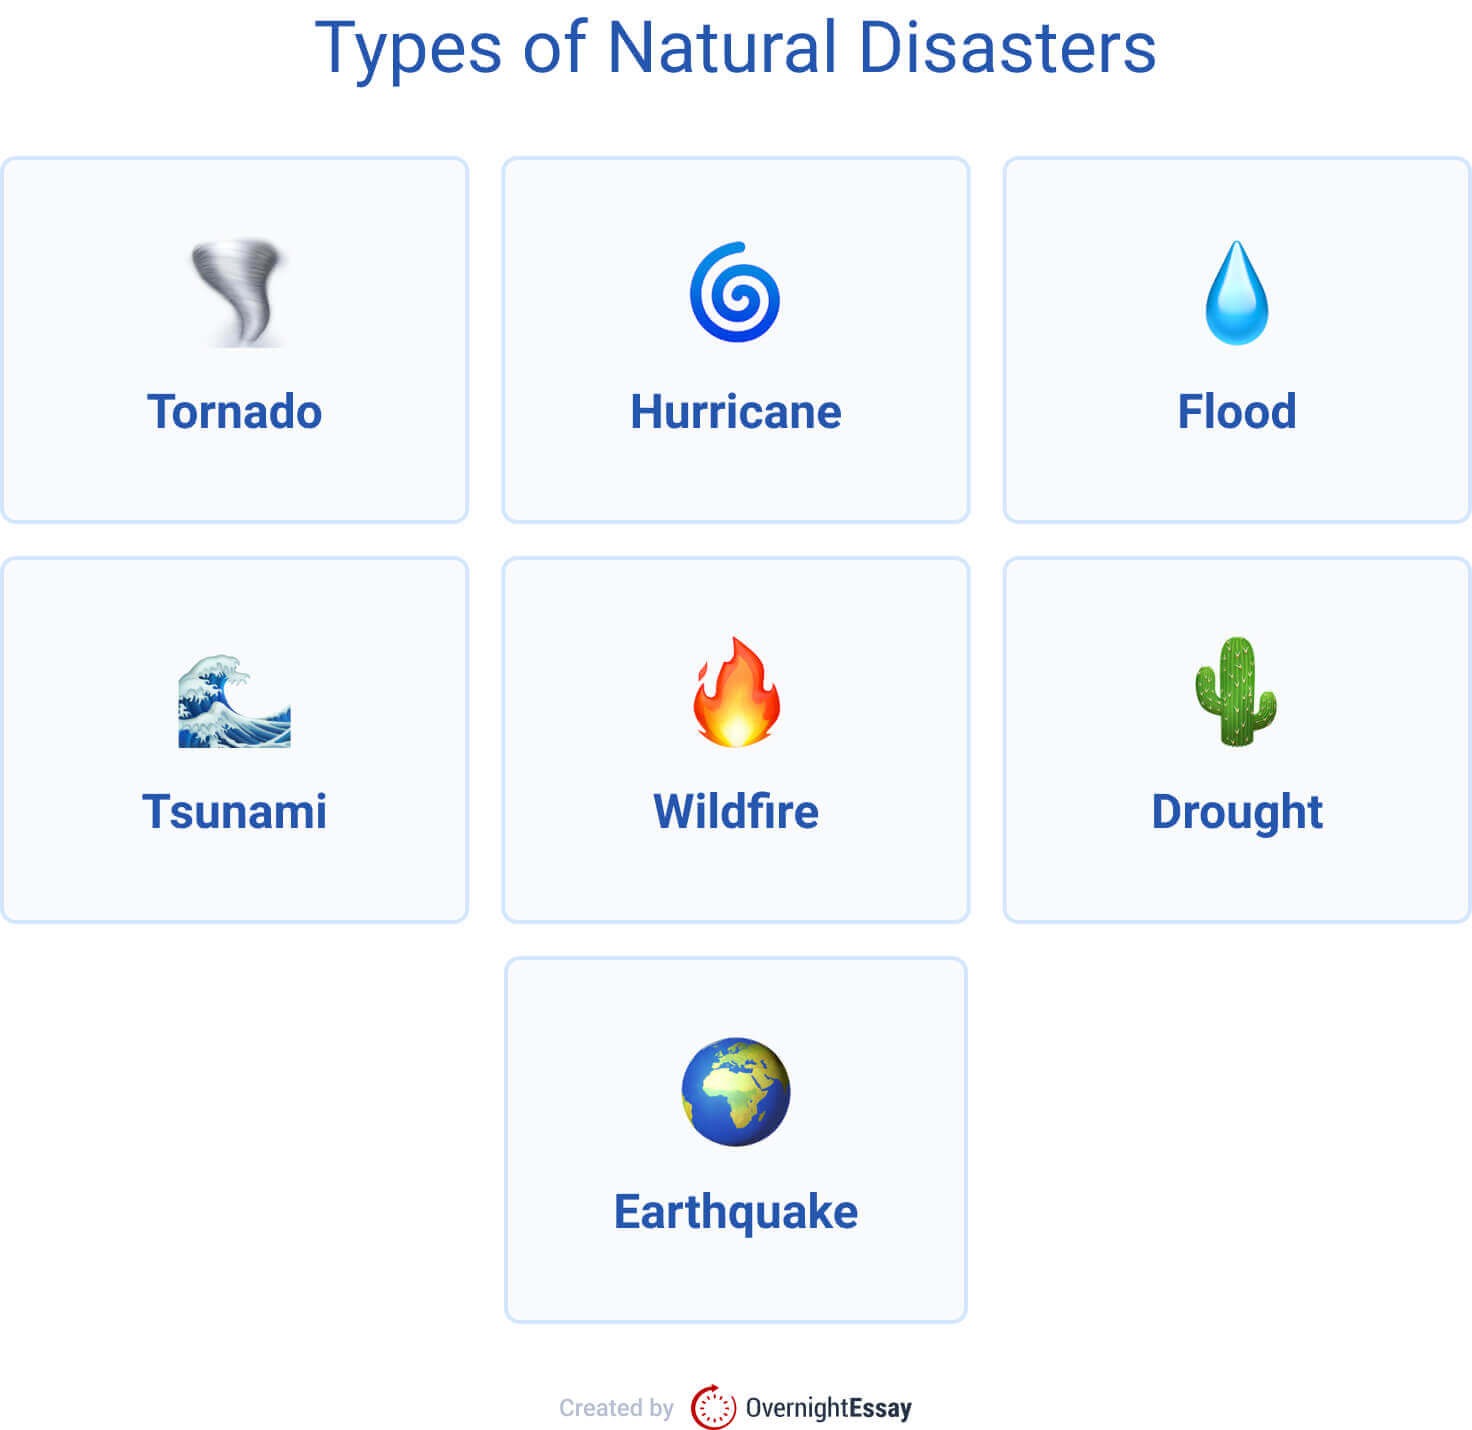 The picture lists the 7 main types of natural disasters.